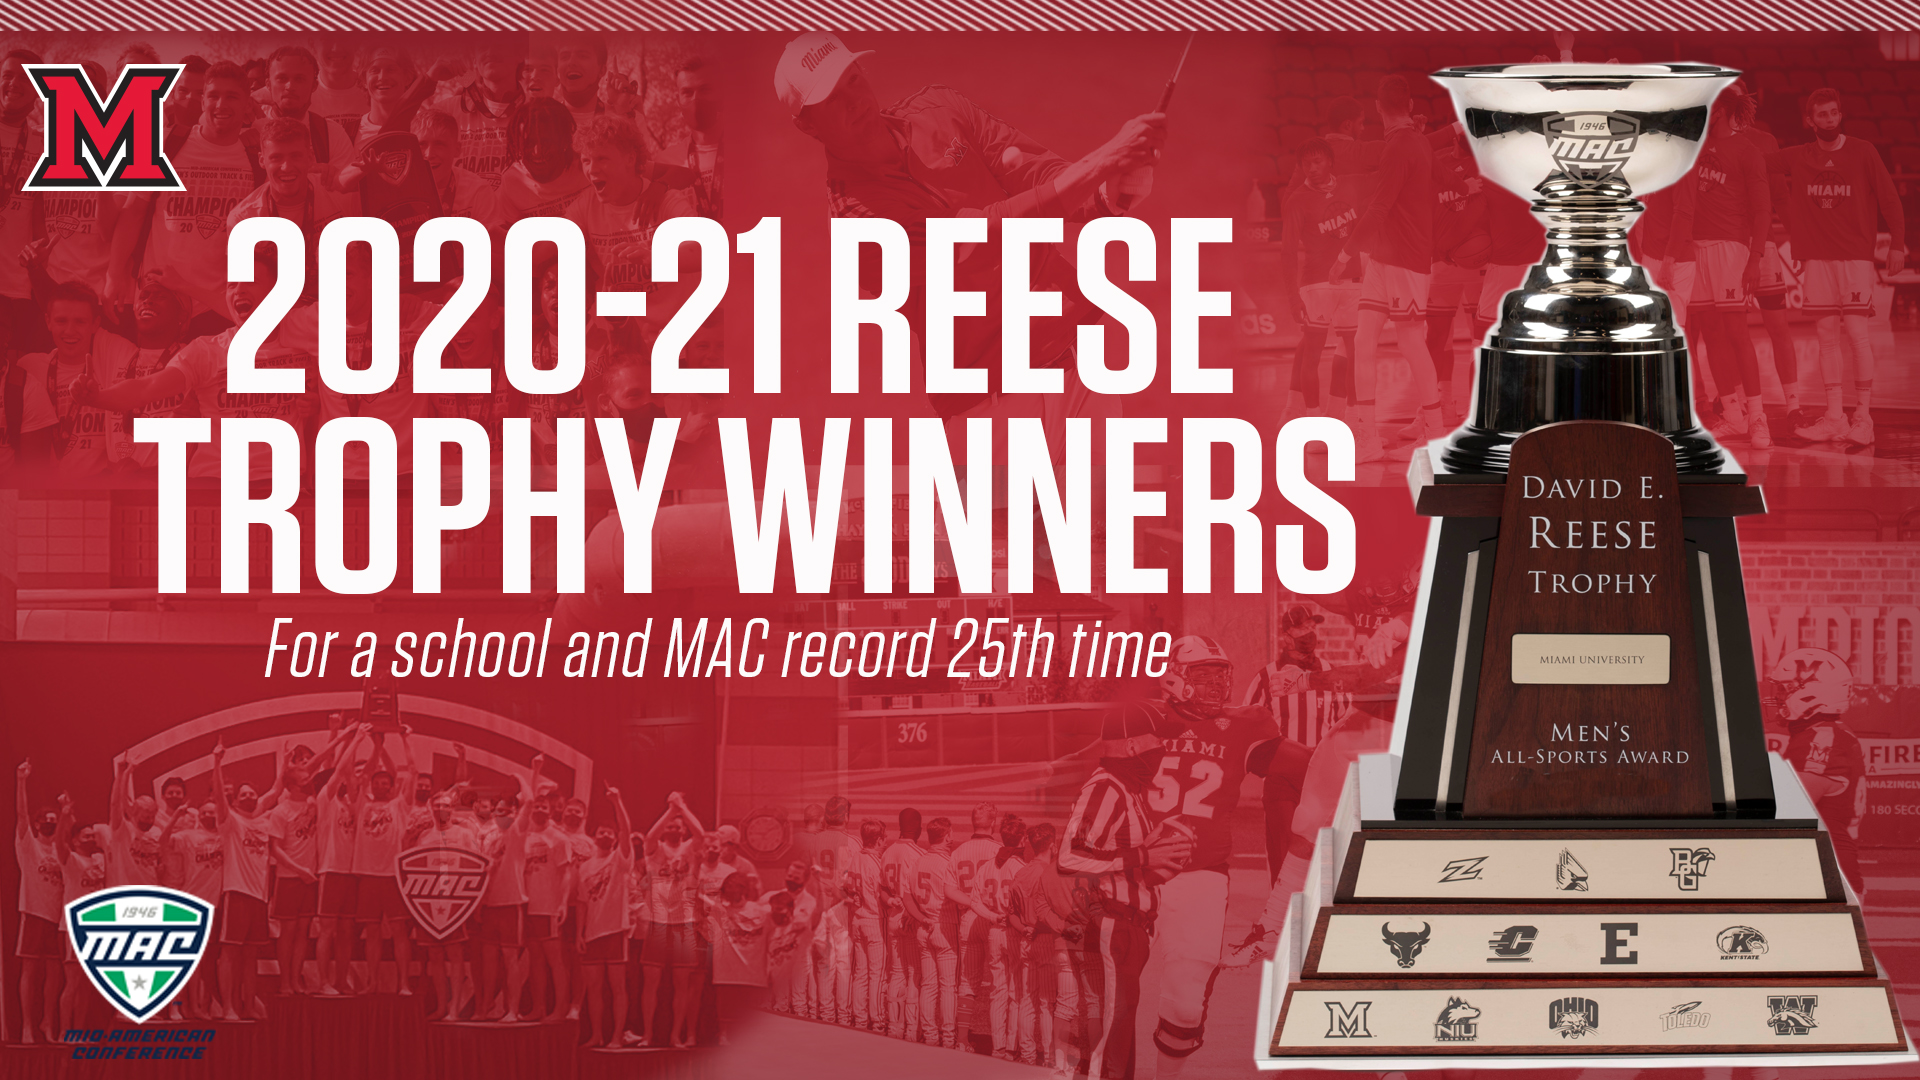 2020-2021 Reese trophy winners for a school and MAC record 25th time